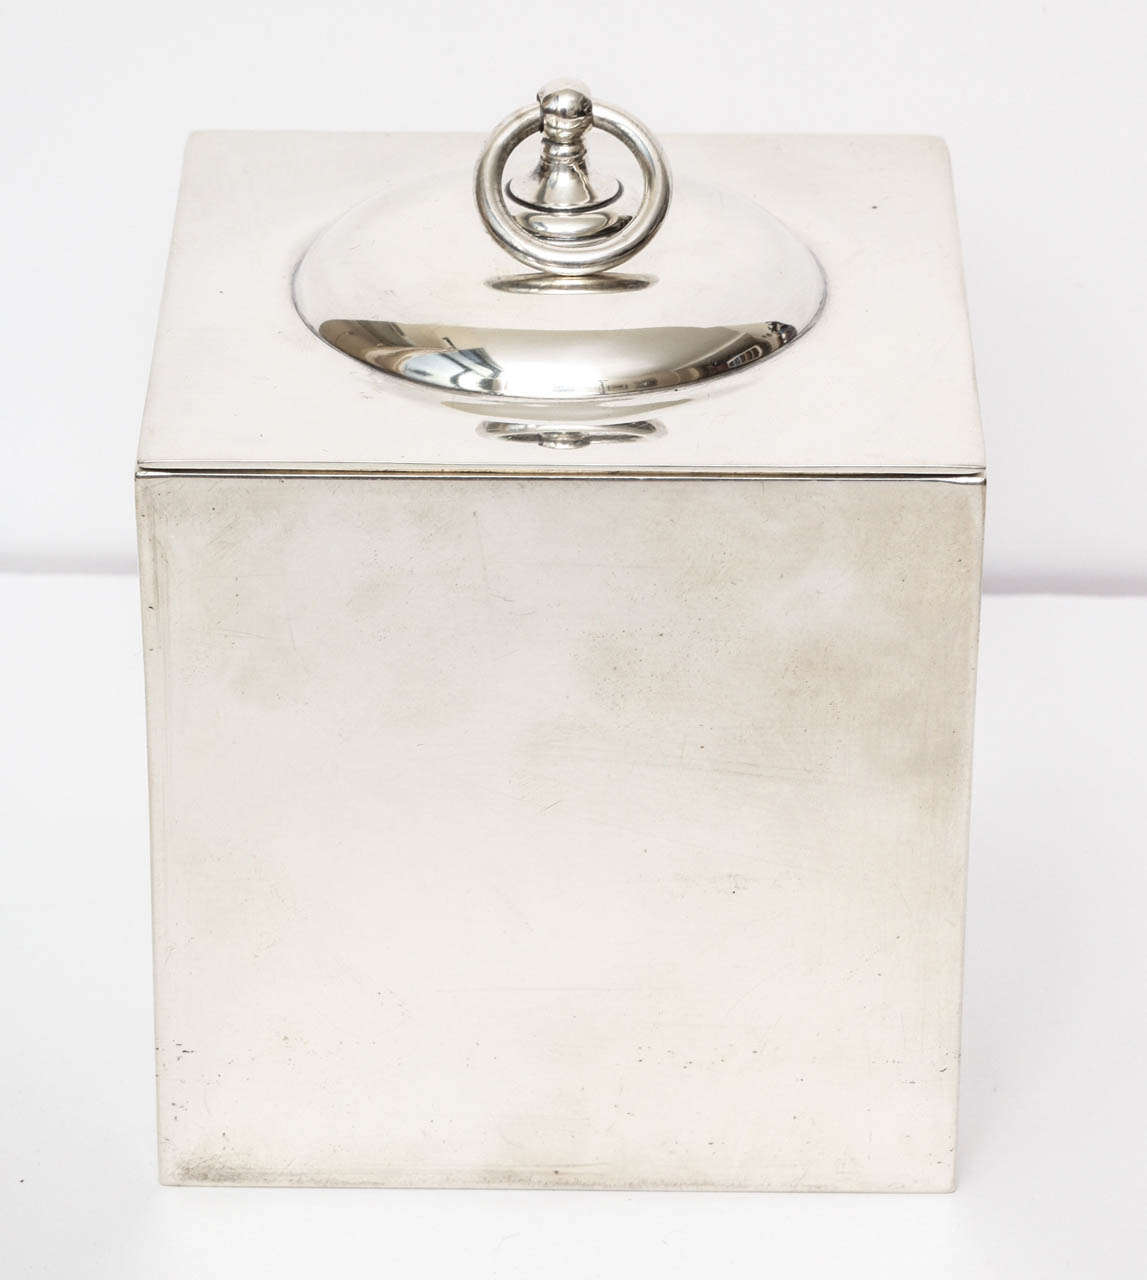 An interesting cube shaped box by Tiffany & Co. The lid is detailed with a raised circular center and a round pull top. The interior is lined with wood. This piece has a nice weight and is very well made. The seams are not noticeable at all which